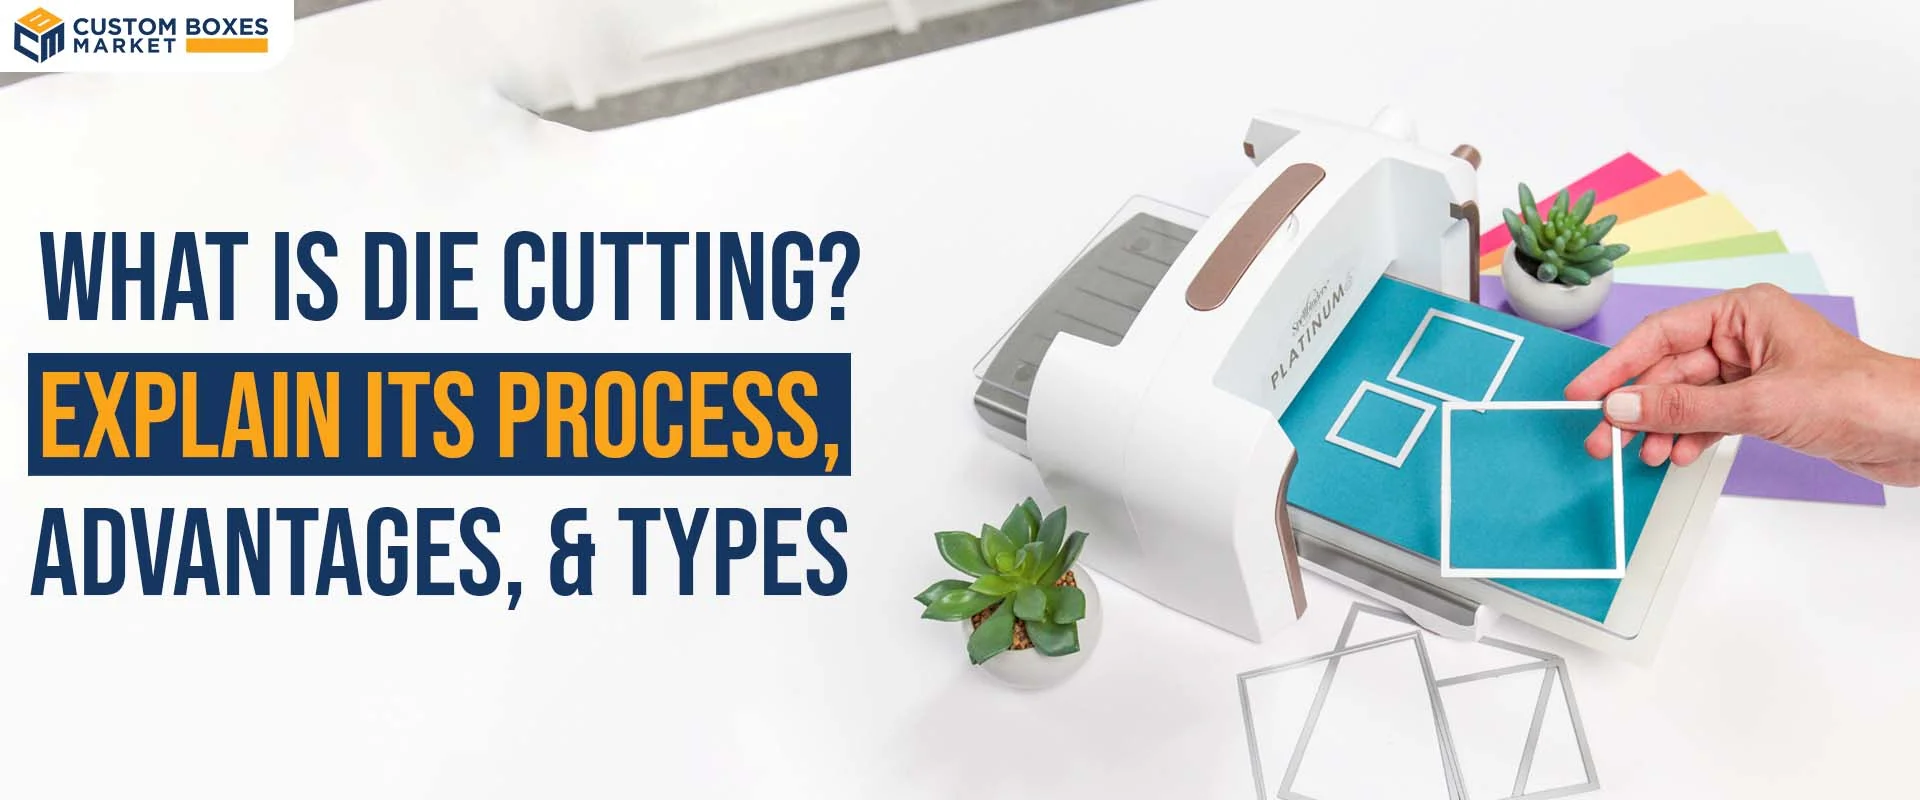 What Is Die-Cutting? Explain Its Process, Advantages, And Types